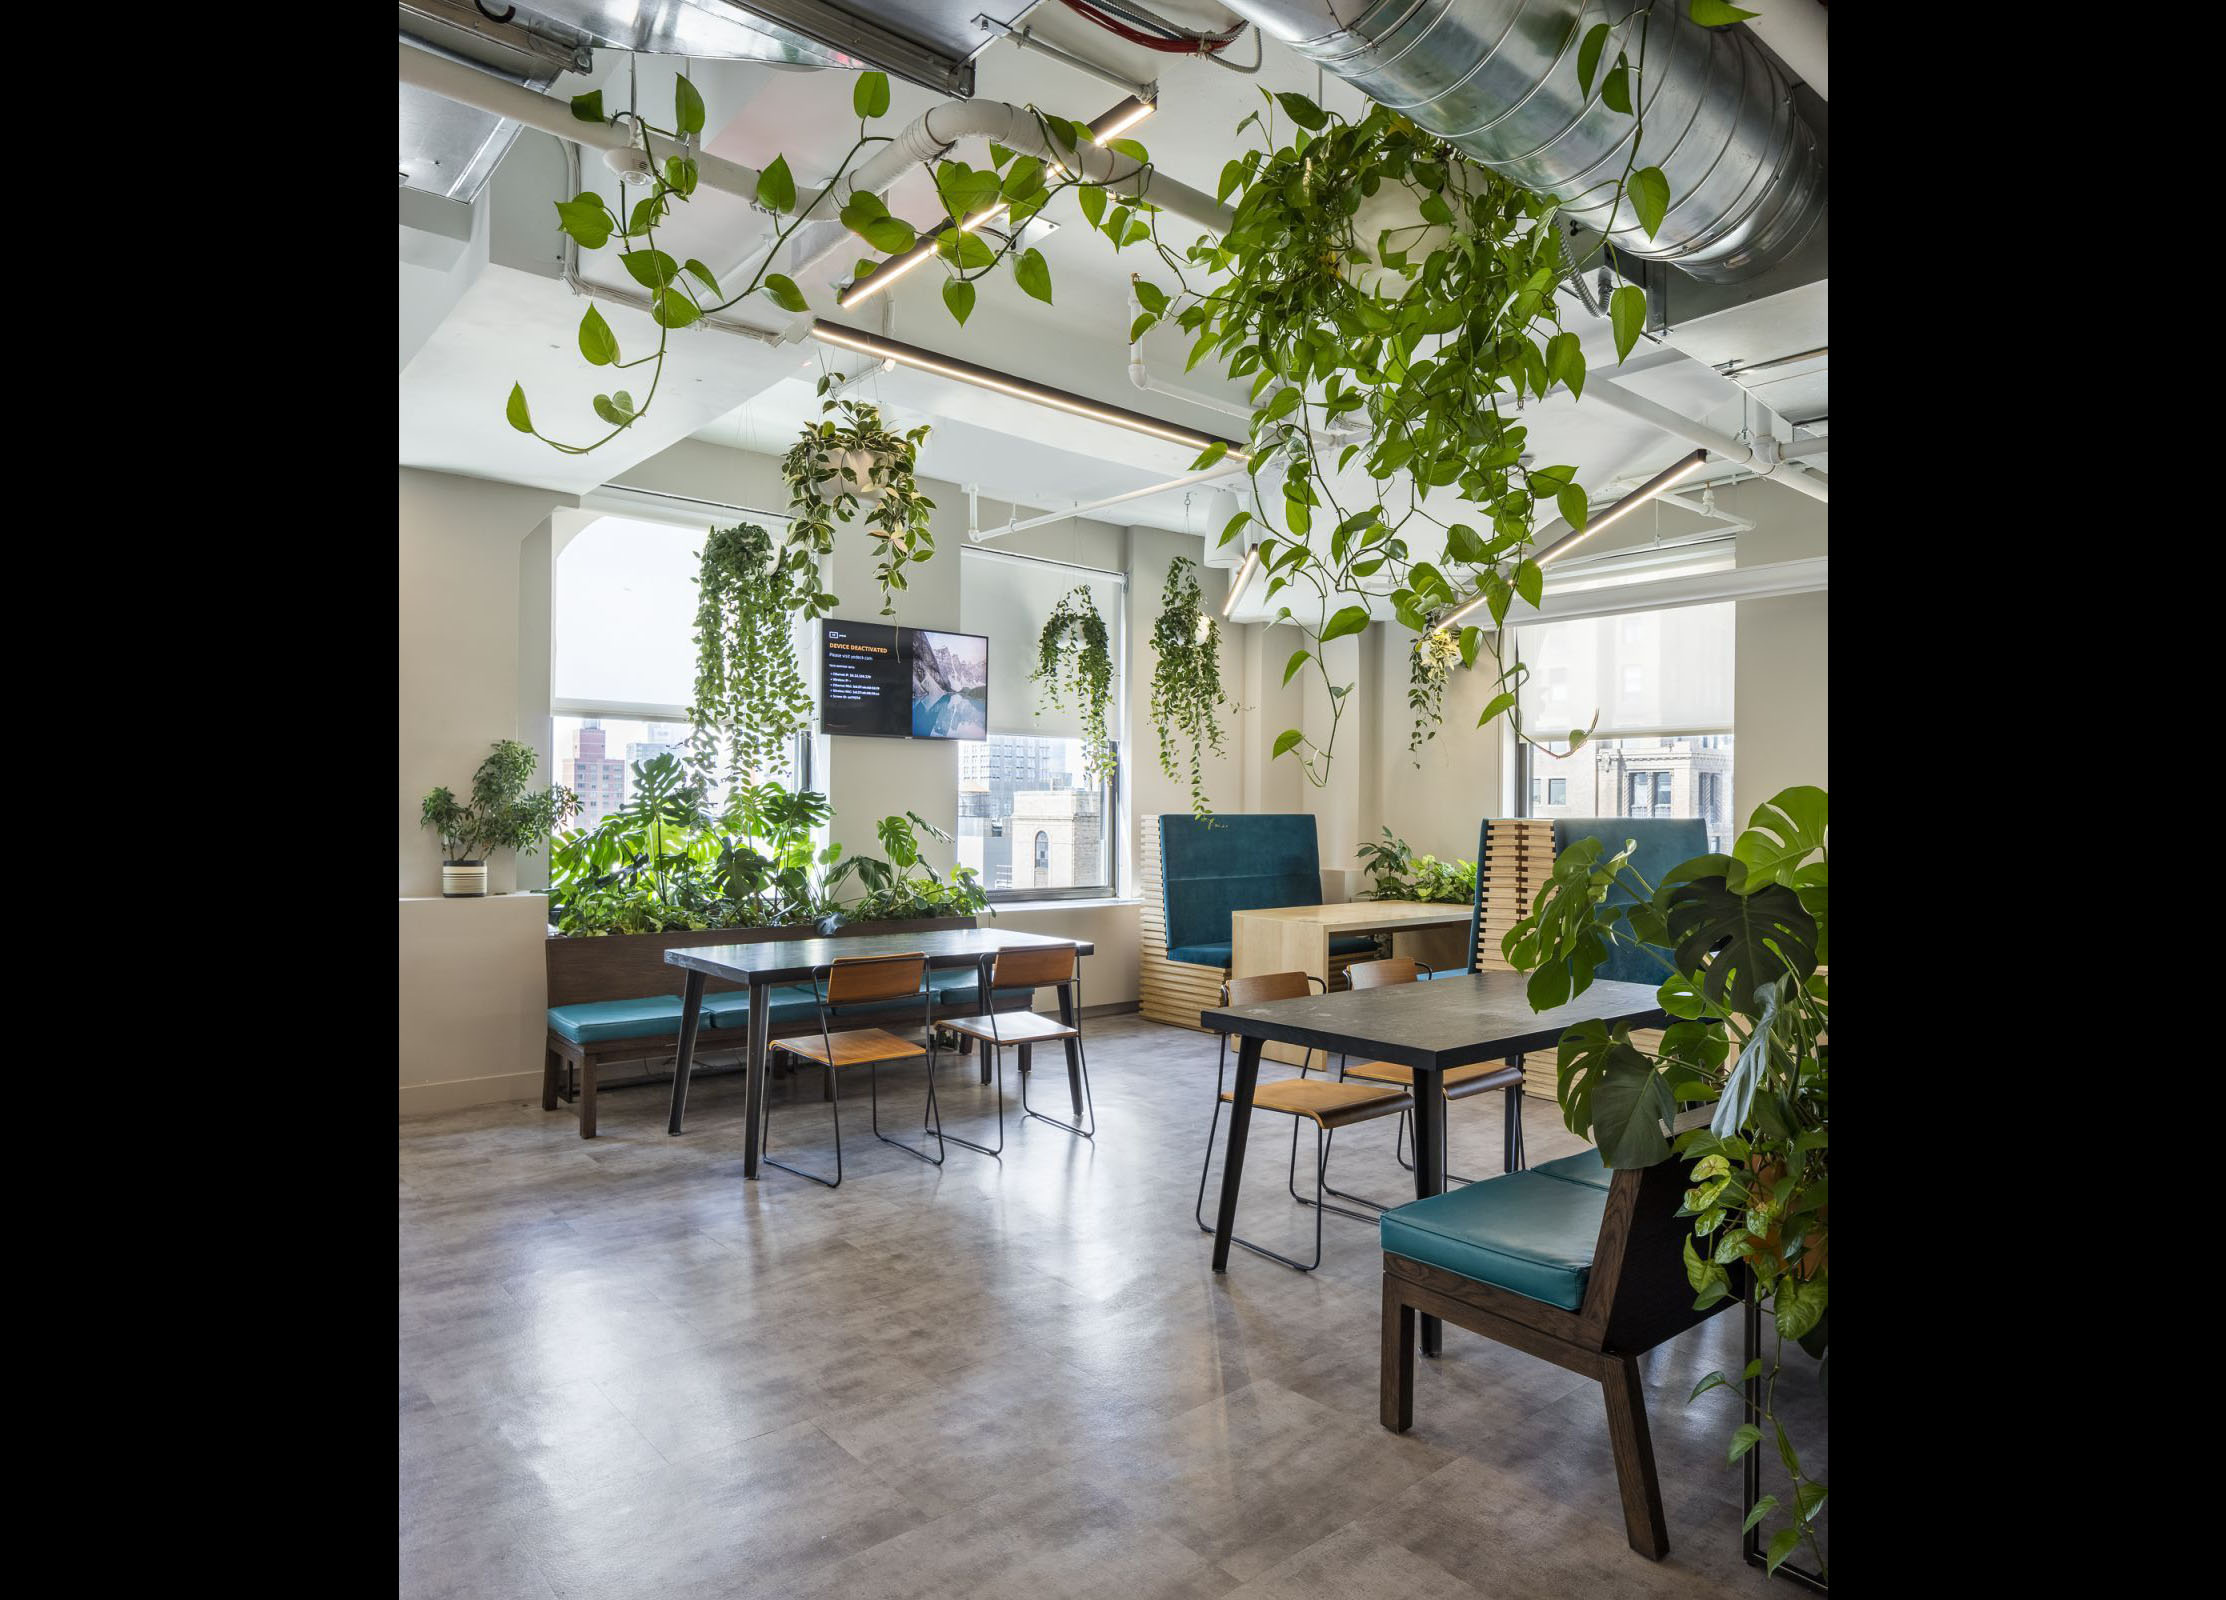 Hanging plants and millwork planters installed in a New York City office.